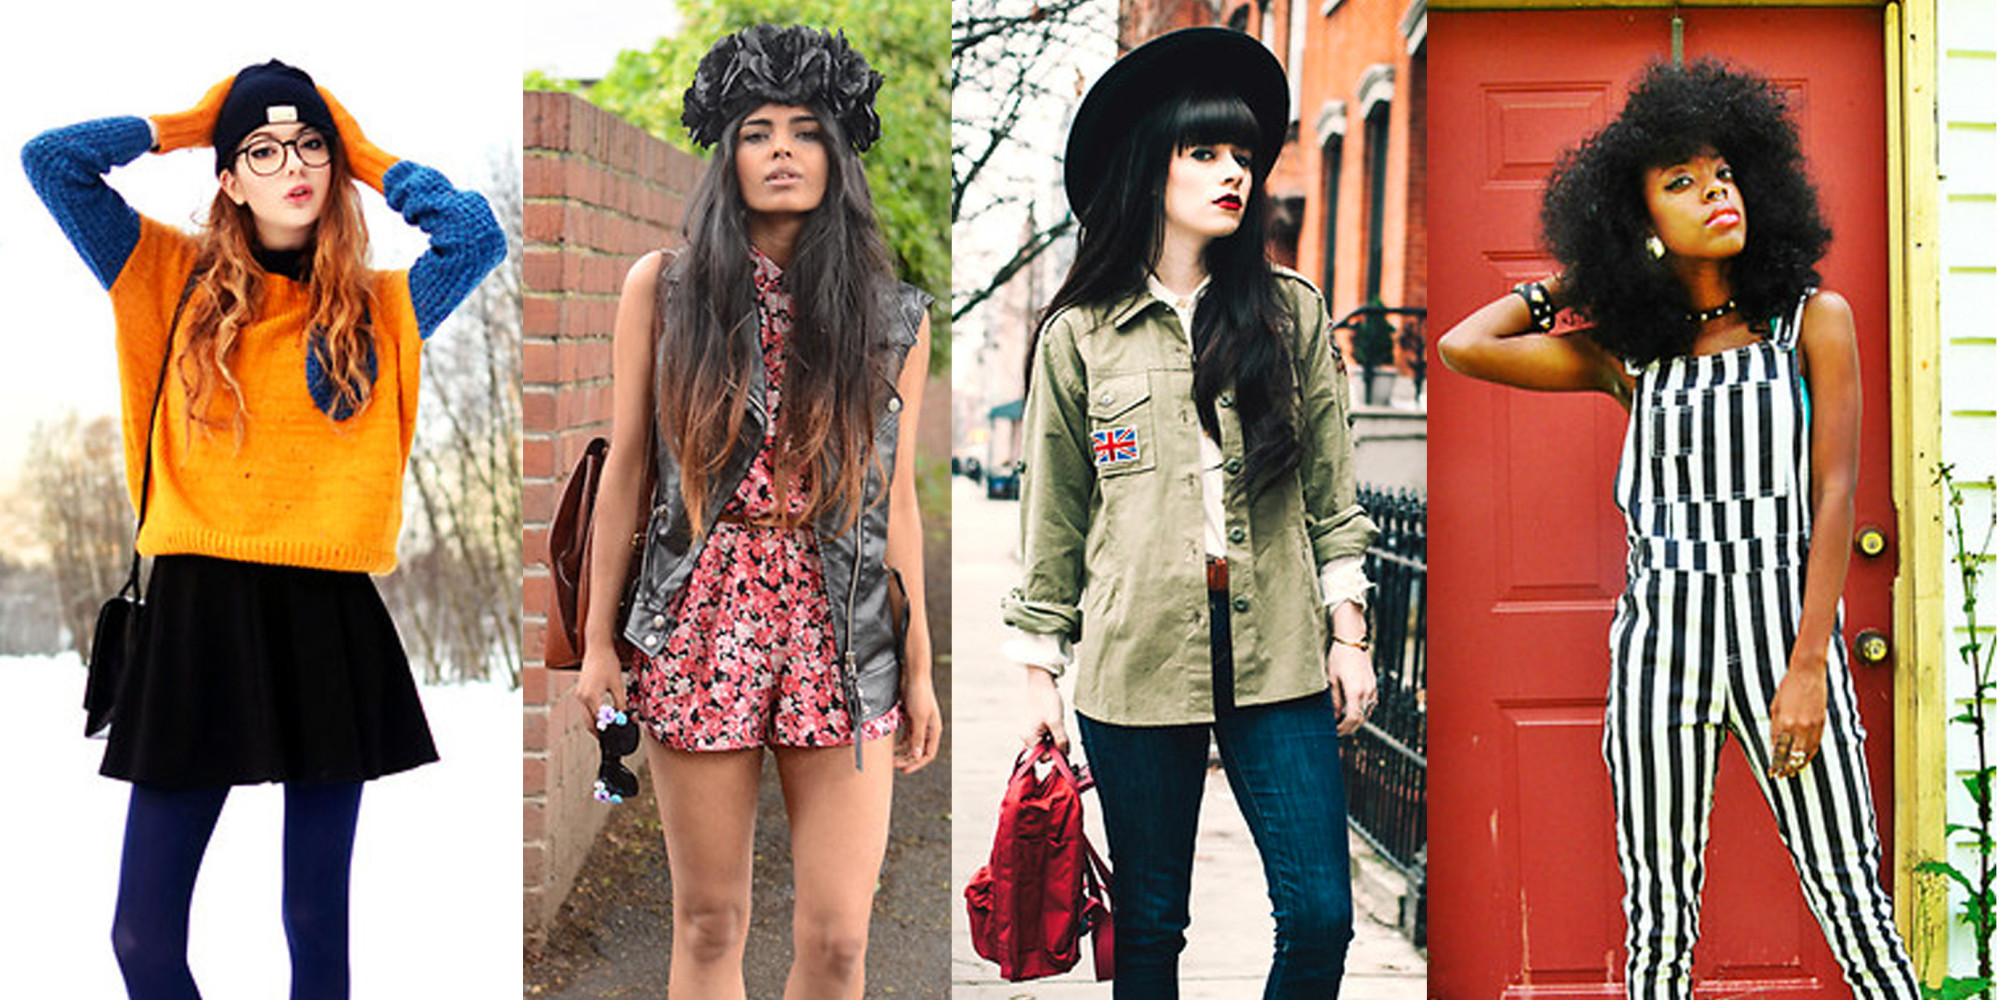 hipster clothes the 13 most hipster items of clothing | huffpost tmxepne